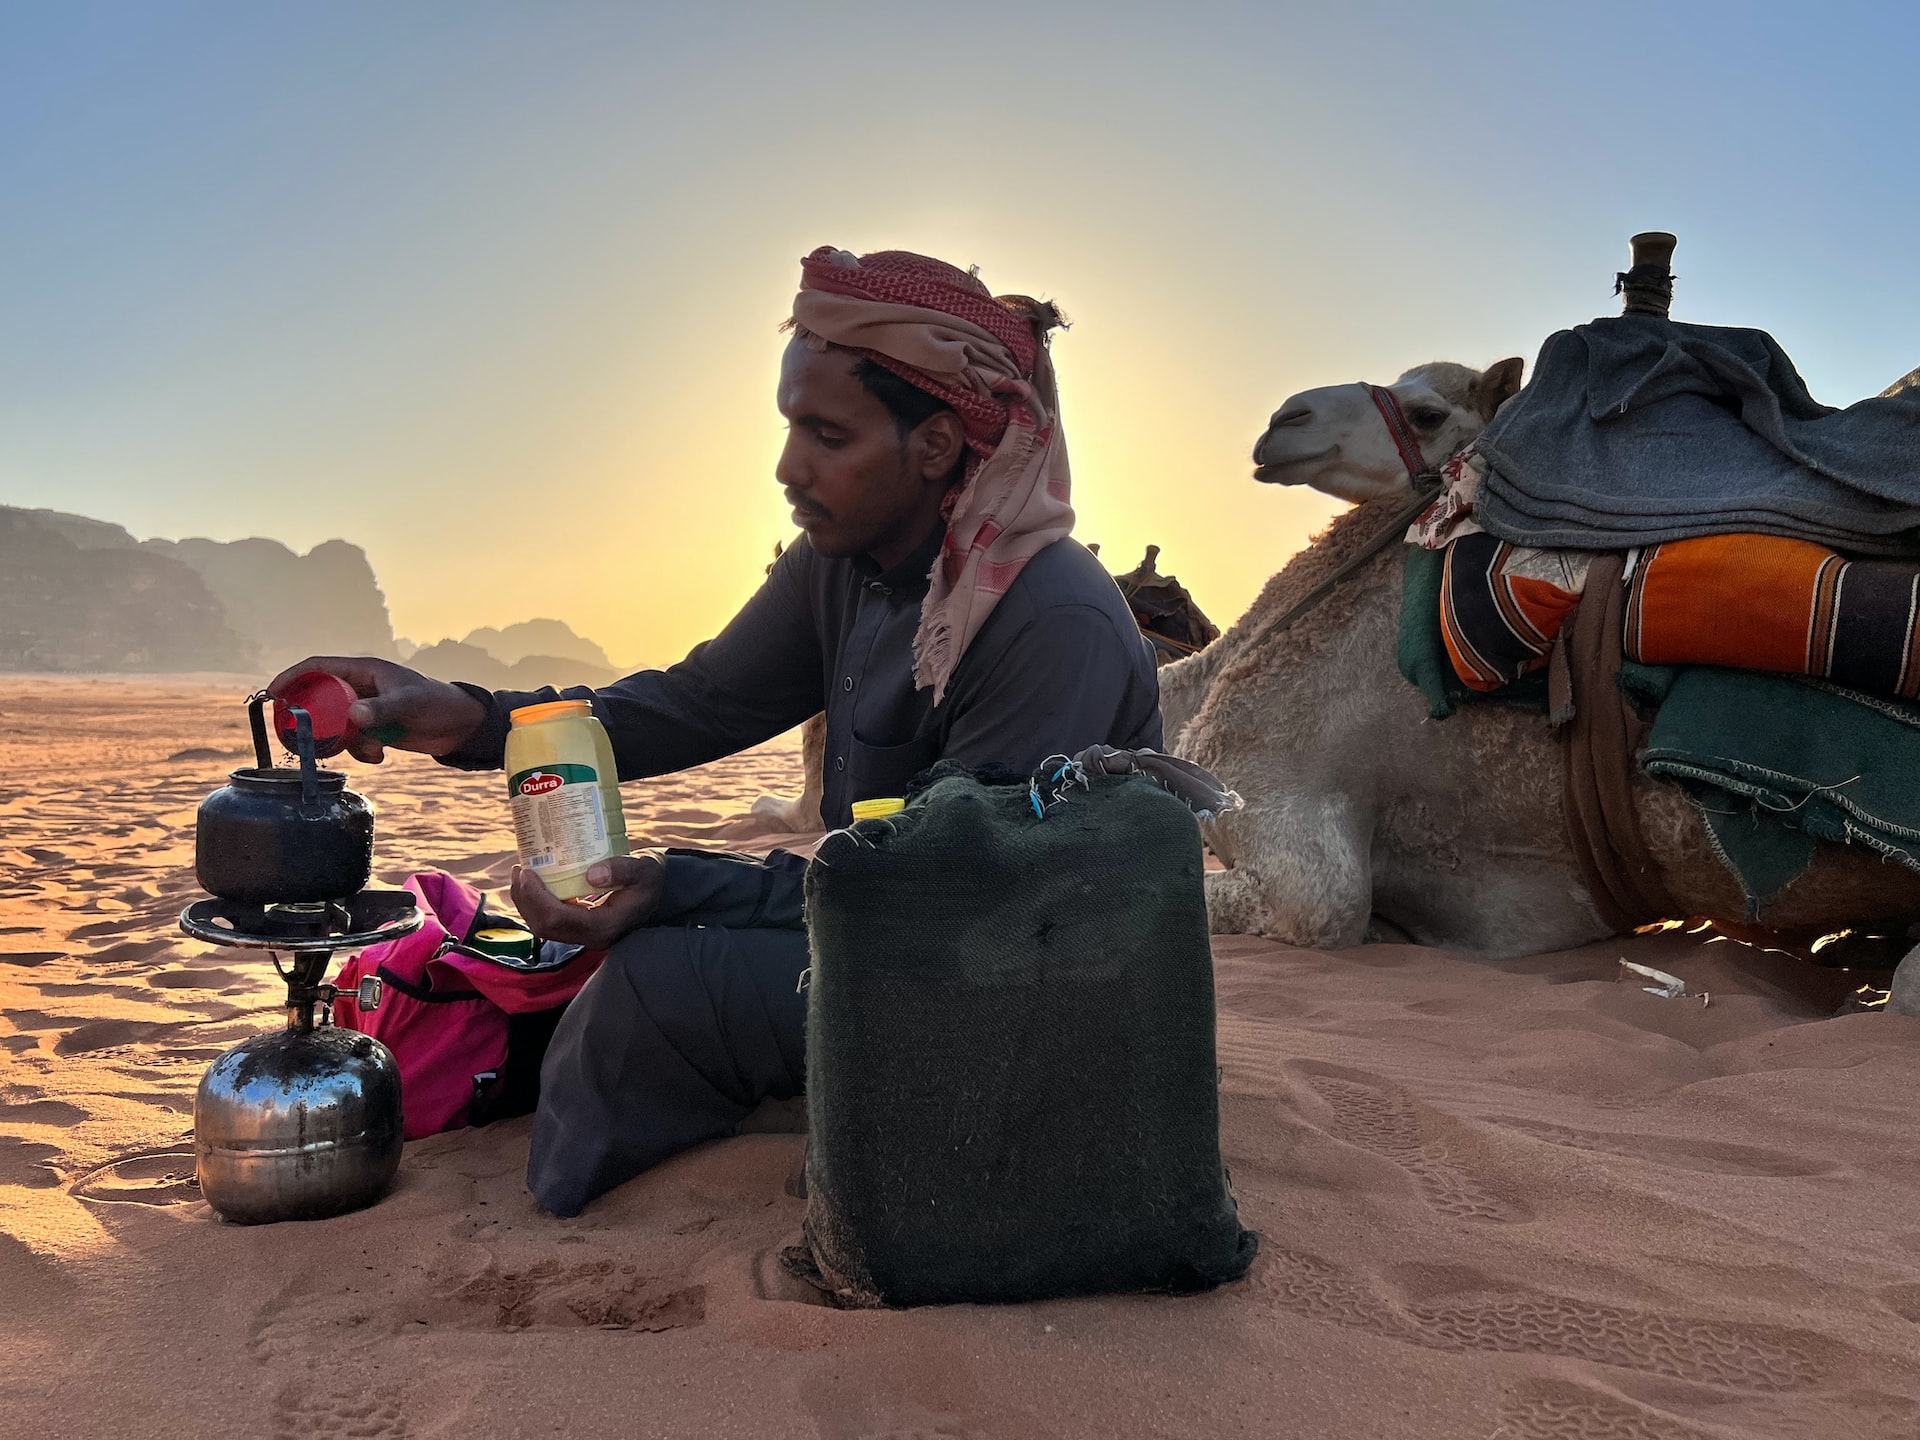 Reasons you should visit Wadi Rum from Israel- The Authentic Bedouin Experience